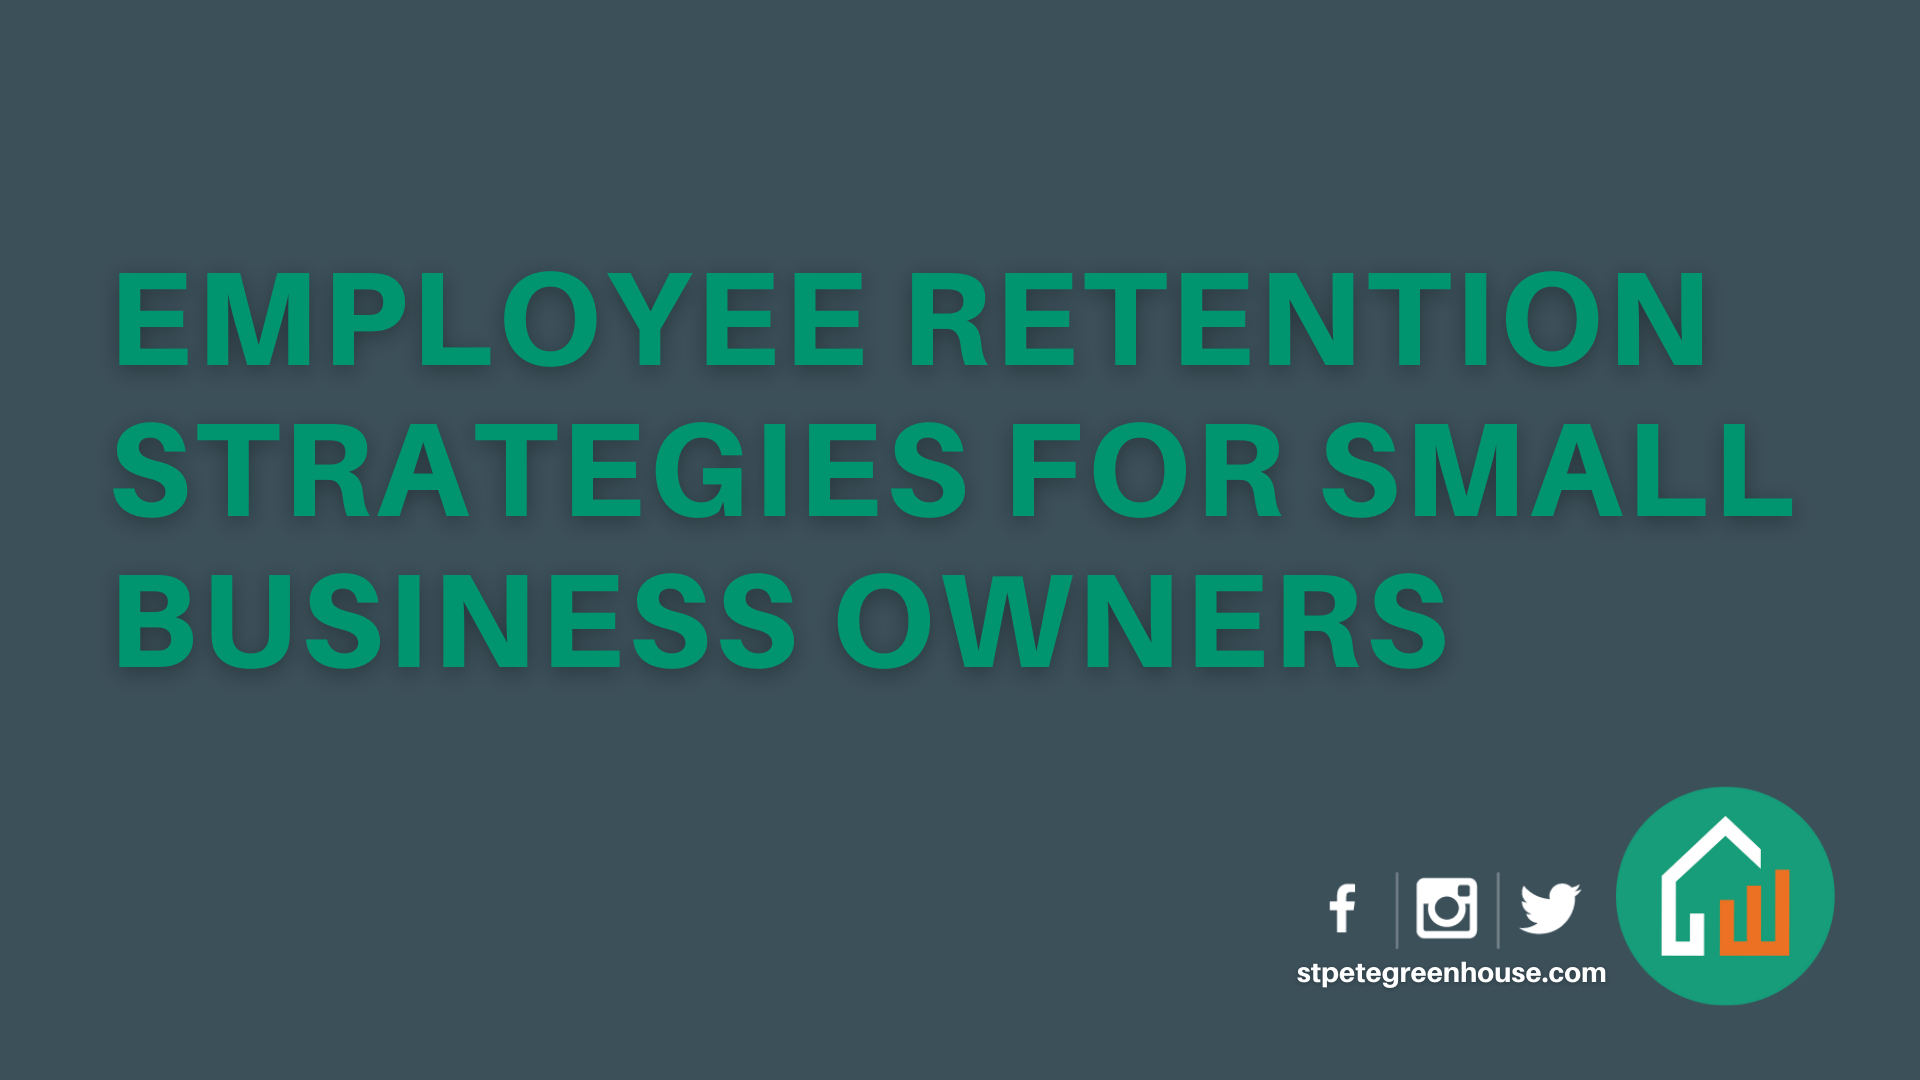 Employee Retention Strategies for Small Business Owners-image